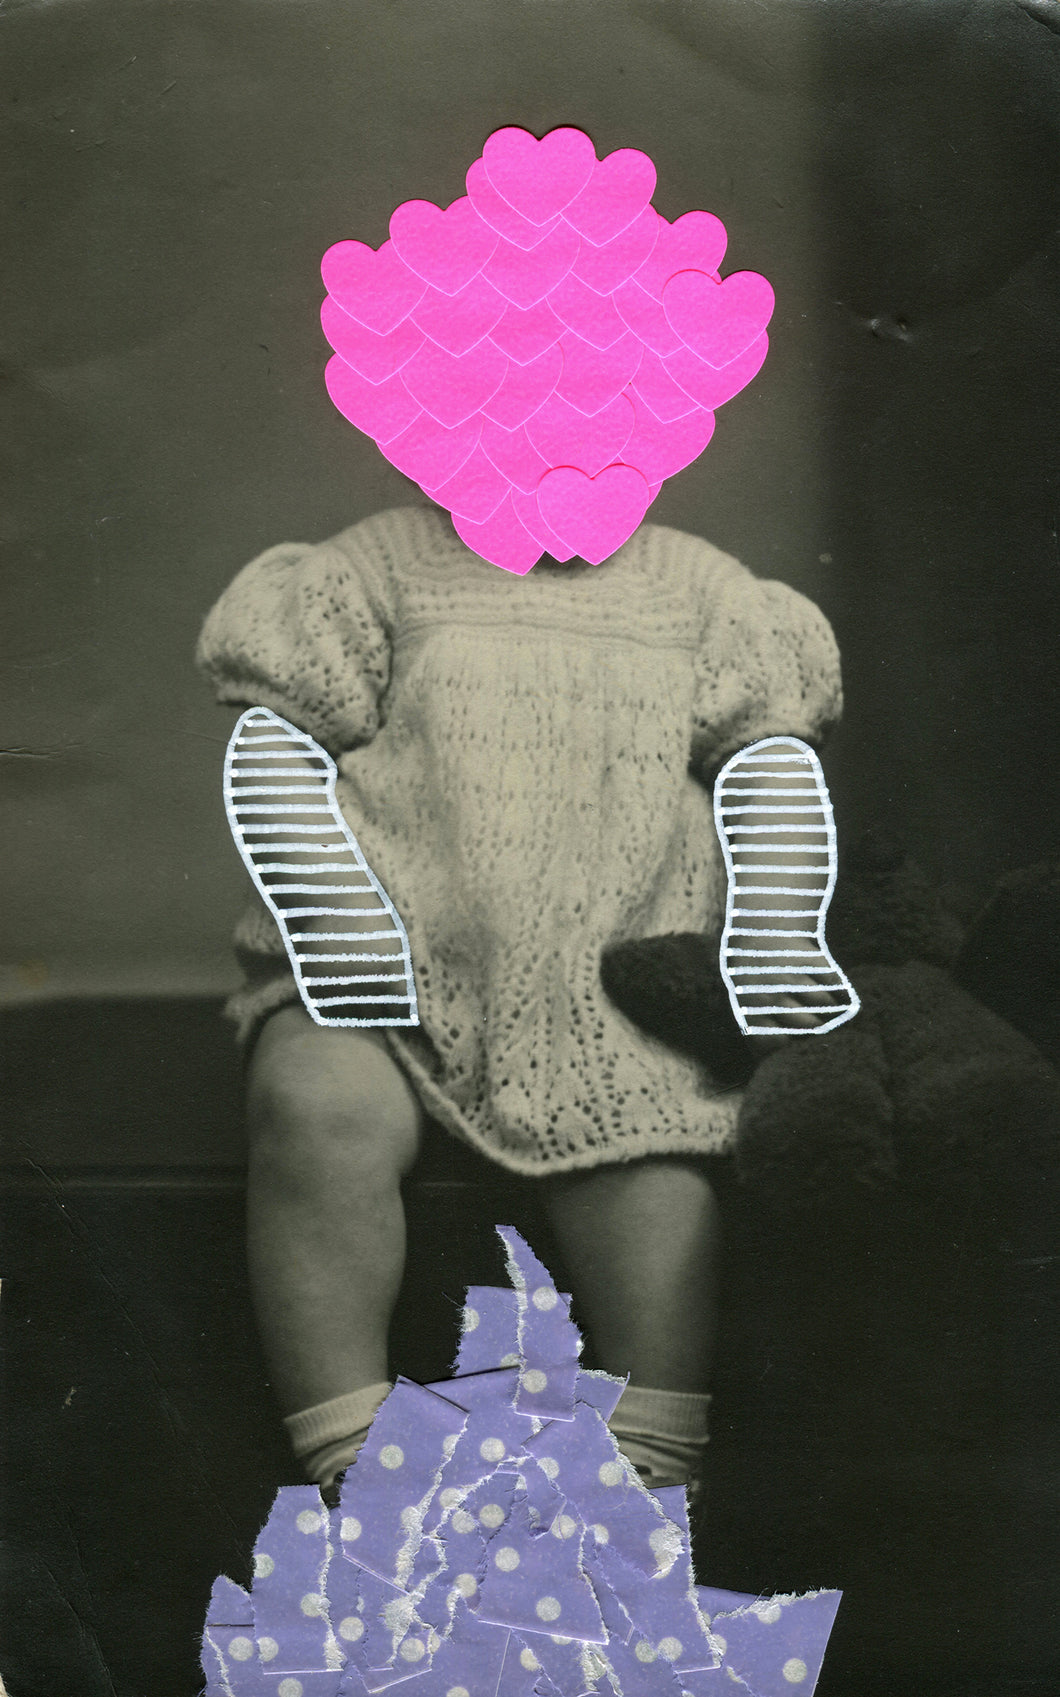 Neon Pink And Lilac Art Collage On Vintage Baby Girl Photography - Naomi Vona Art